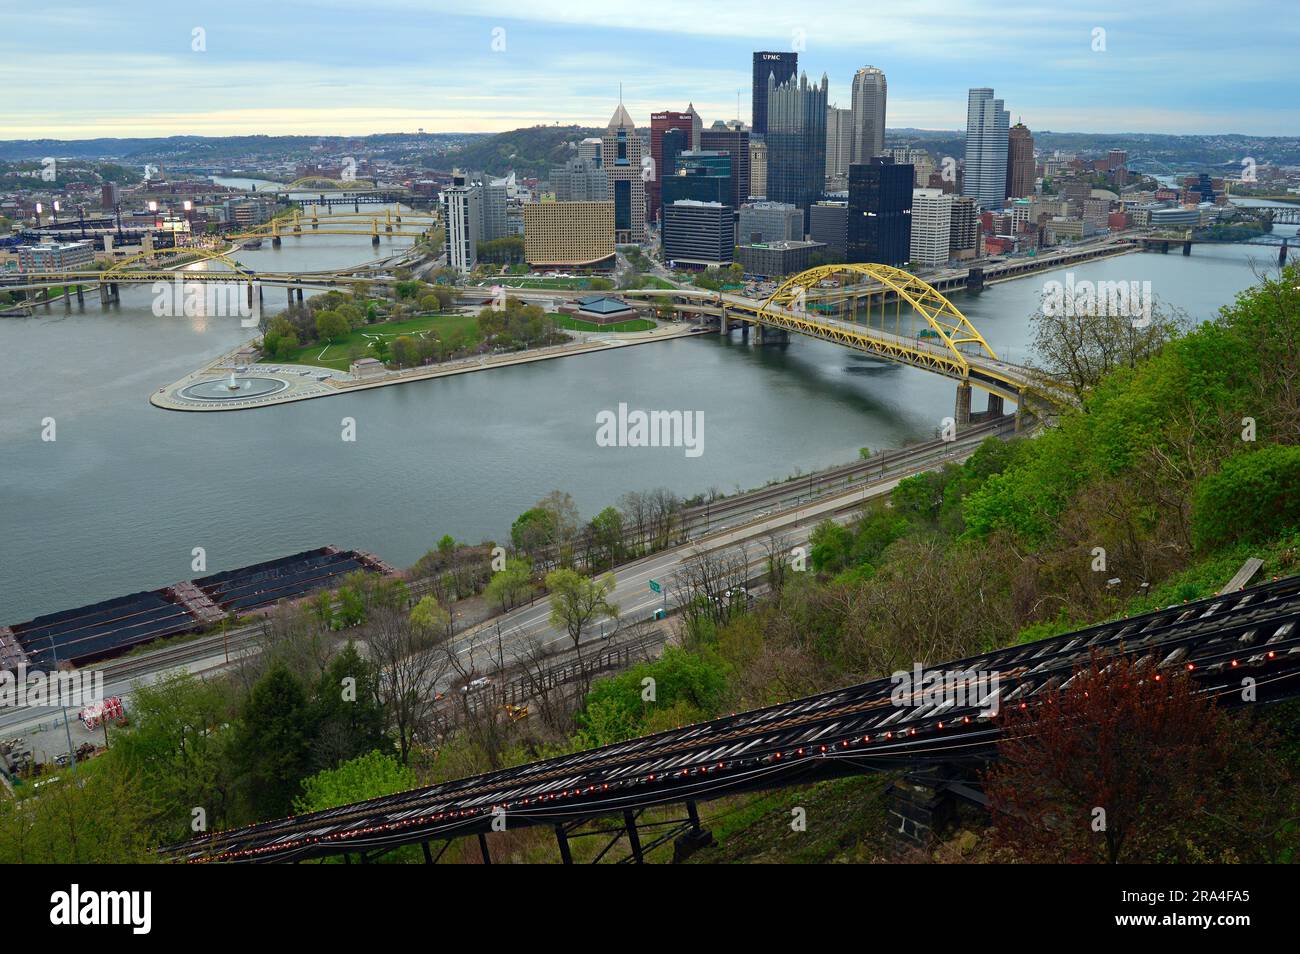 The city of Pittsburgh as seen from the Duquesne Incline Stock Photo